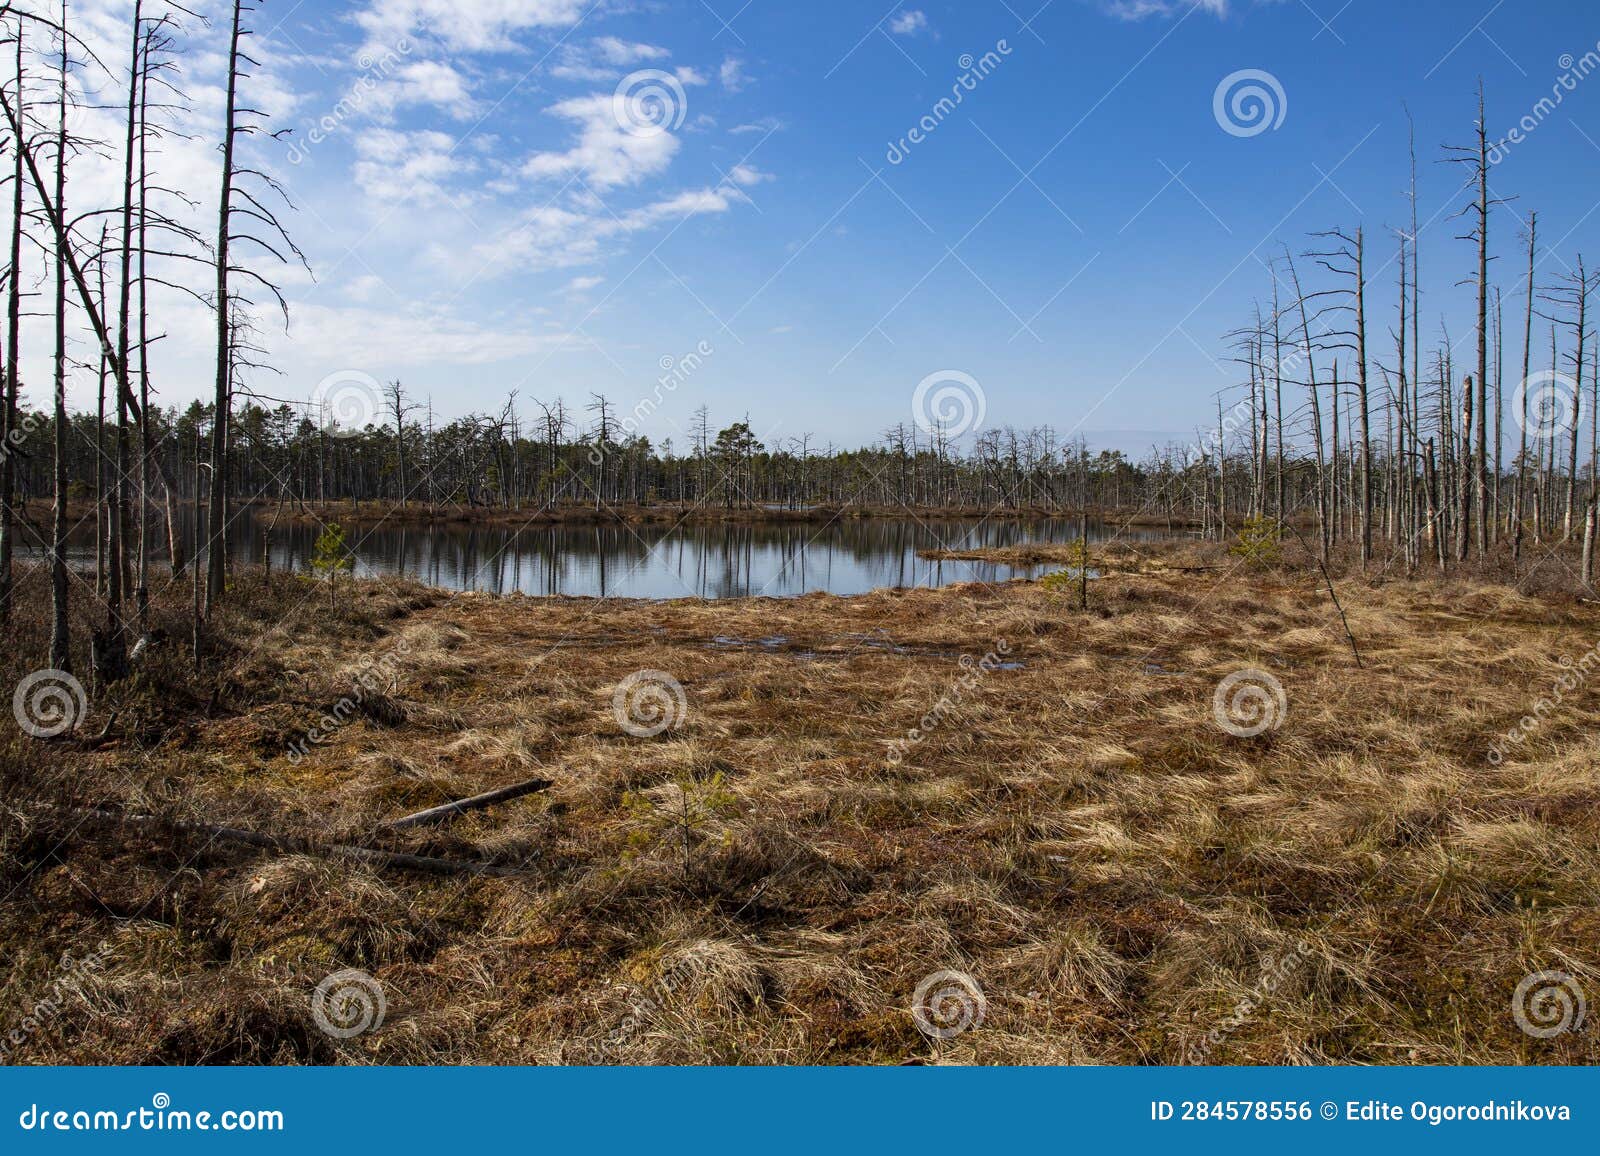 bog landscape with pools in spring, cloudy sky, cena moorland, latvia